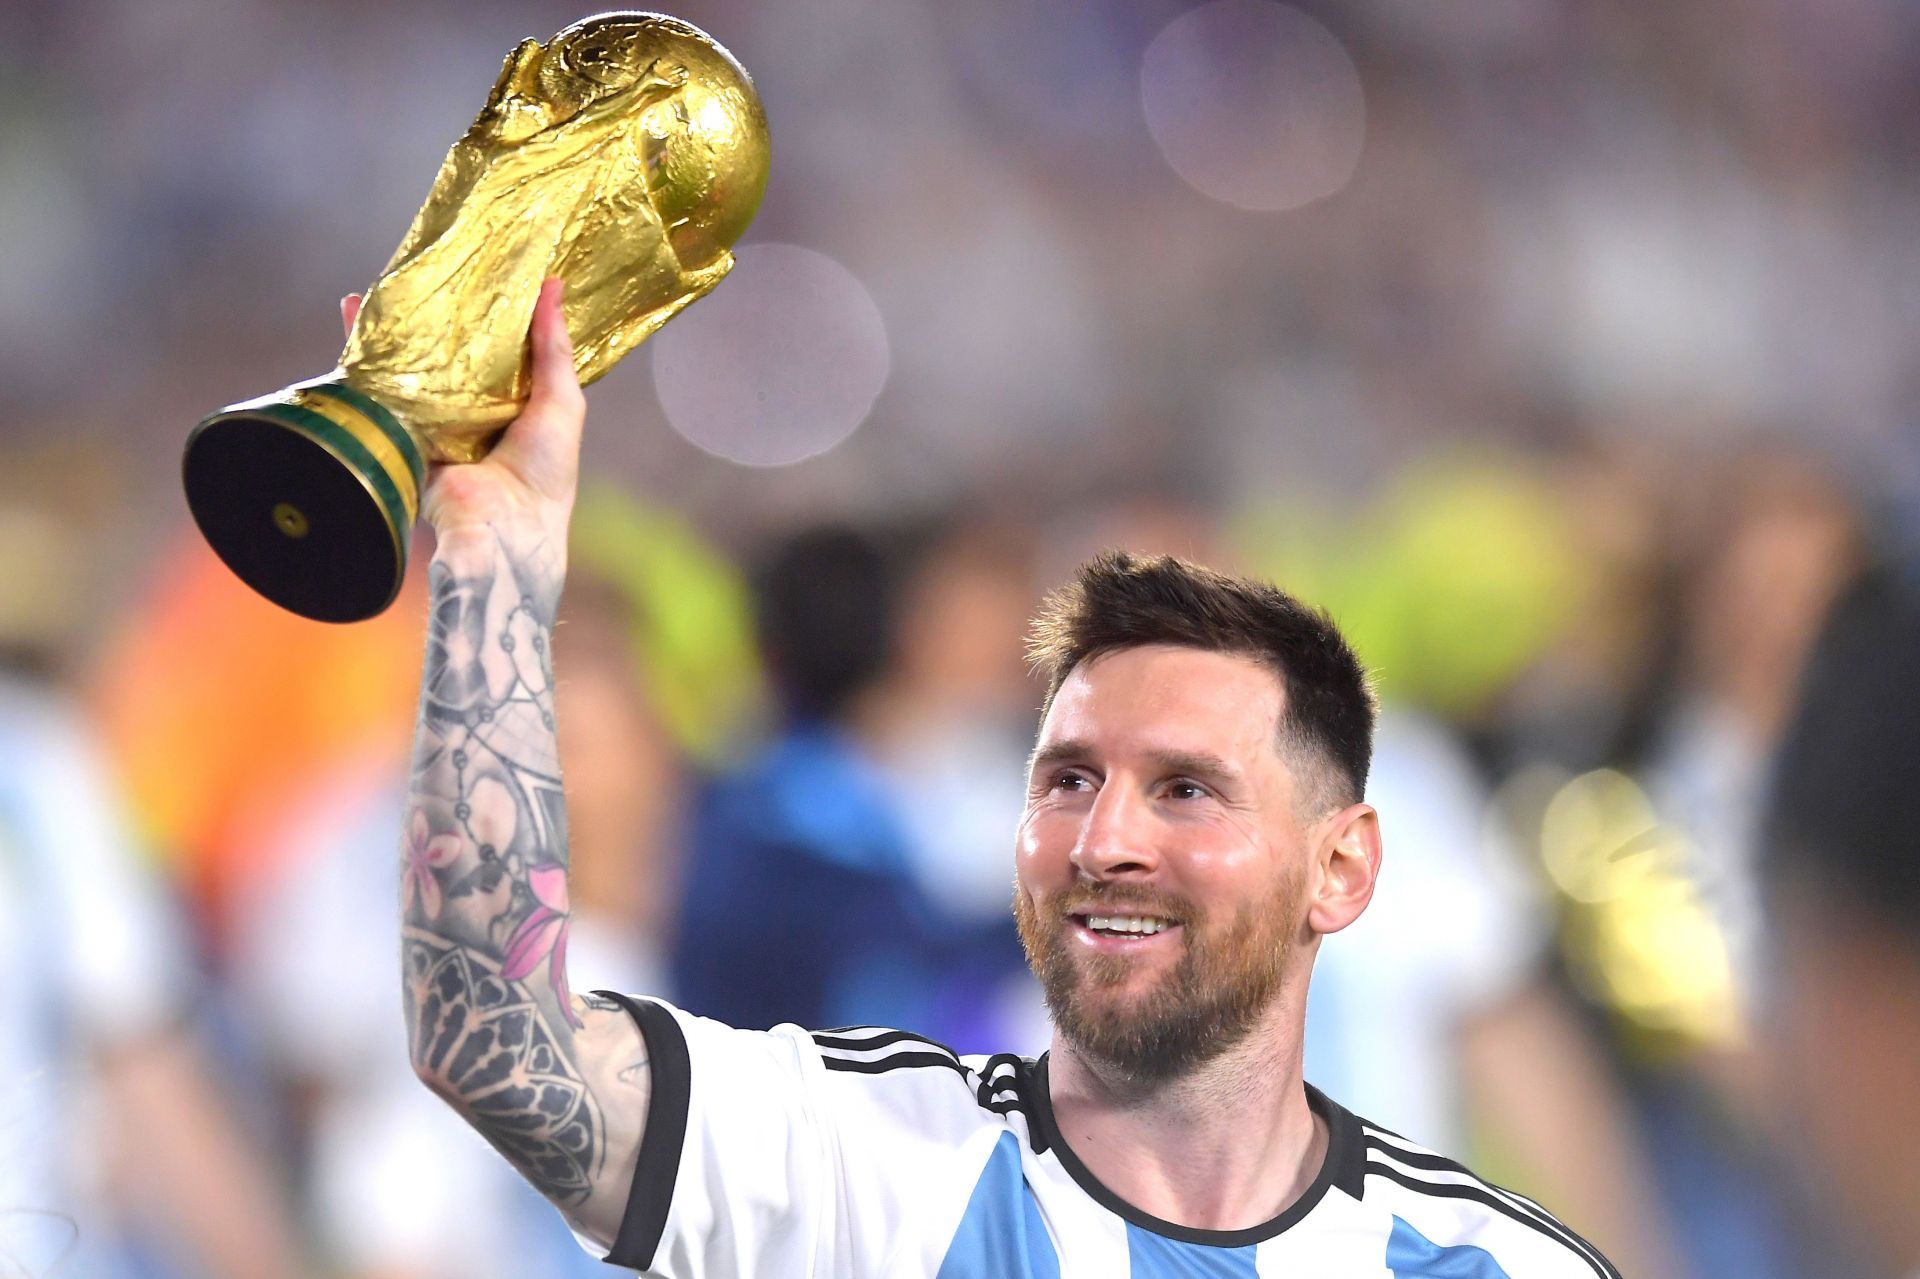 Lionel Messi cemented his legacy by winning the World Cup.